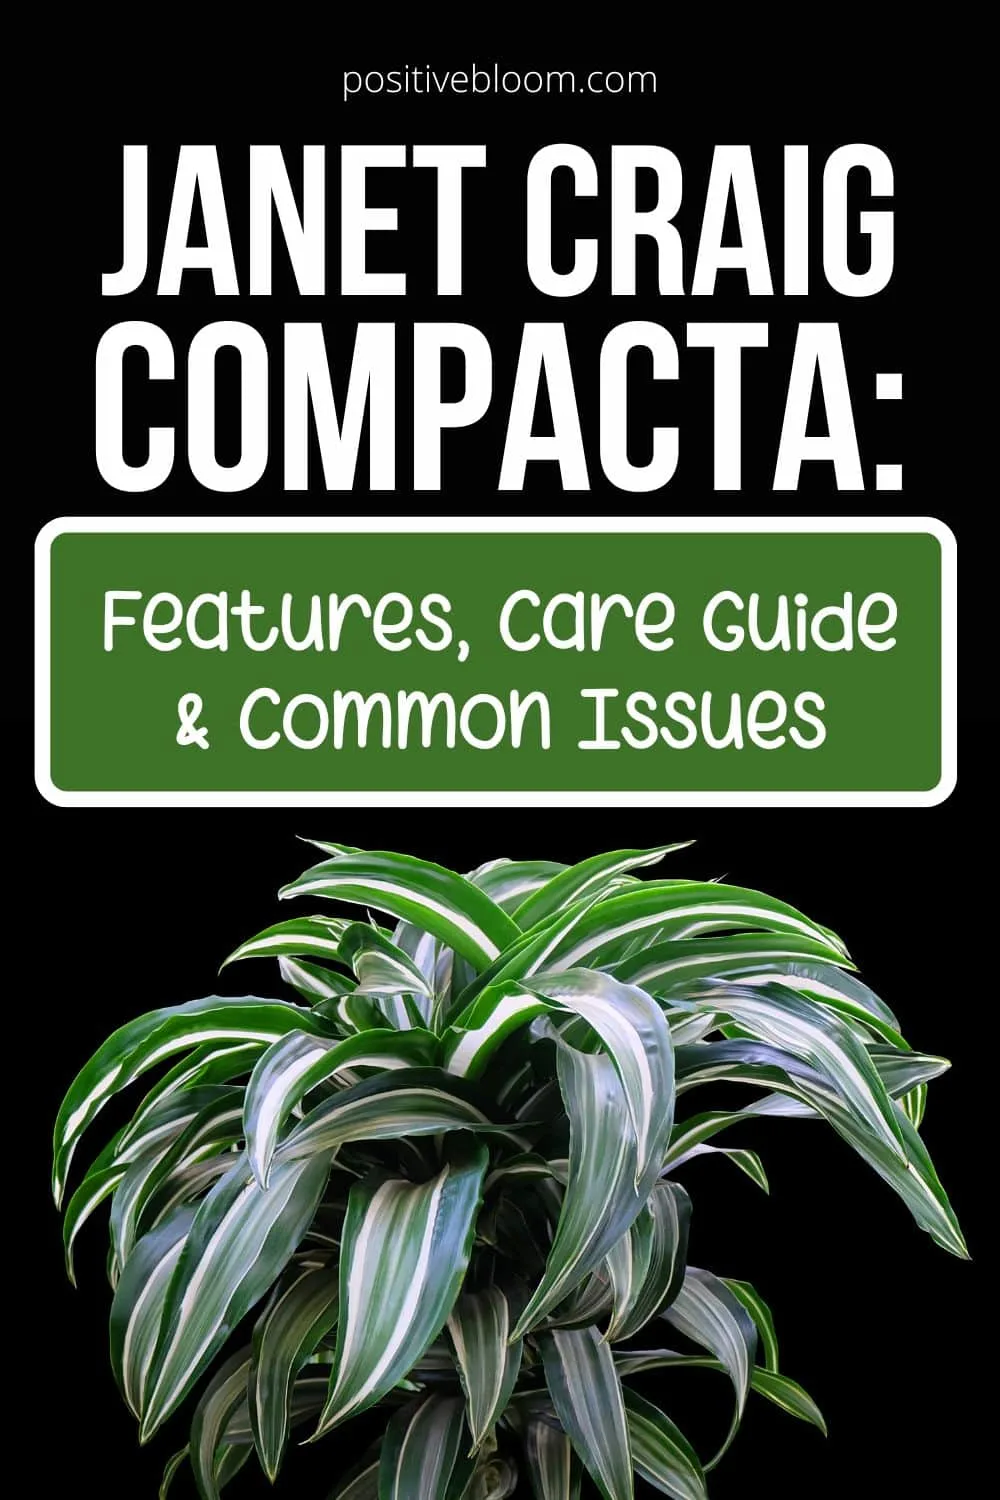 Janet Craig Compacta Features, Care Guide & Common Issues Pinterest